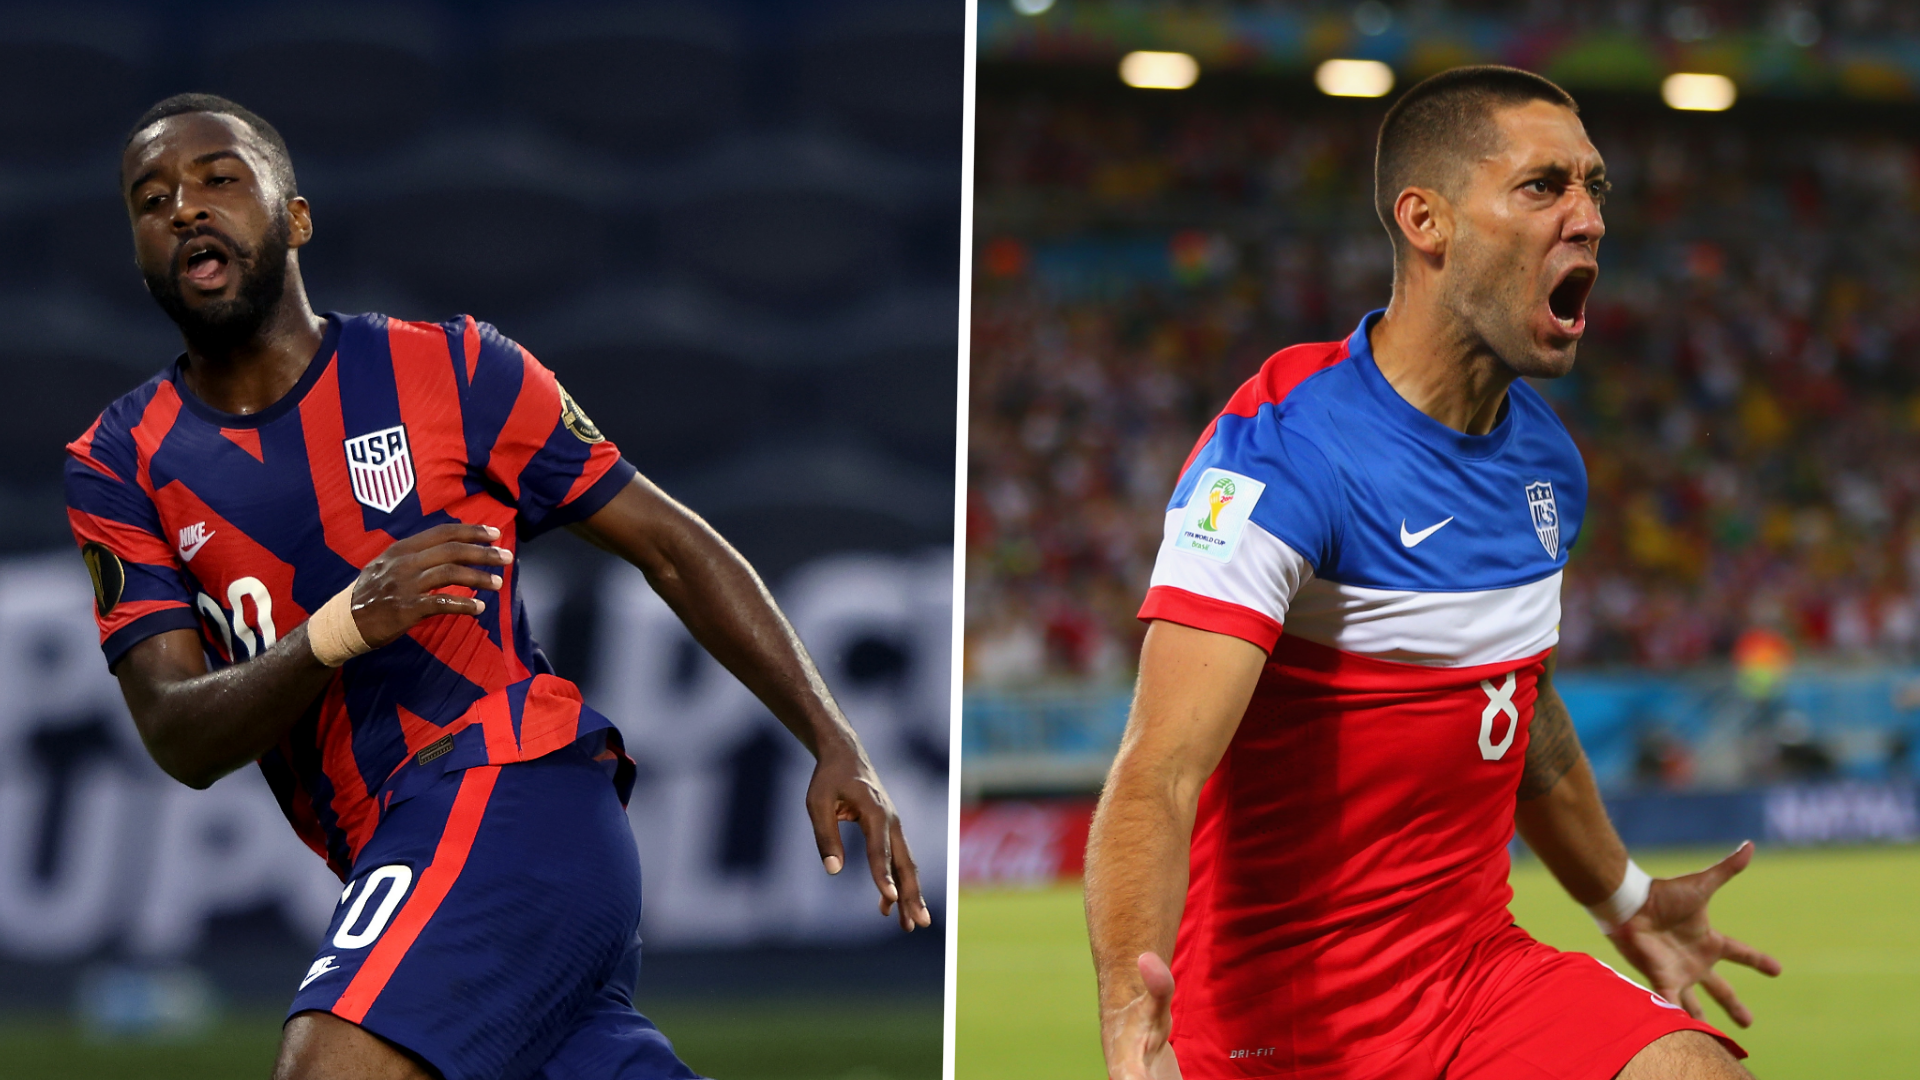 Moore eclipses Dempsey to score fastest goal in USMNT history